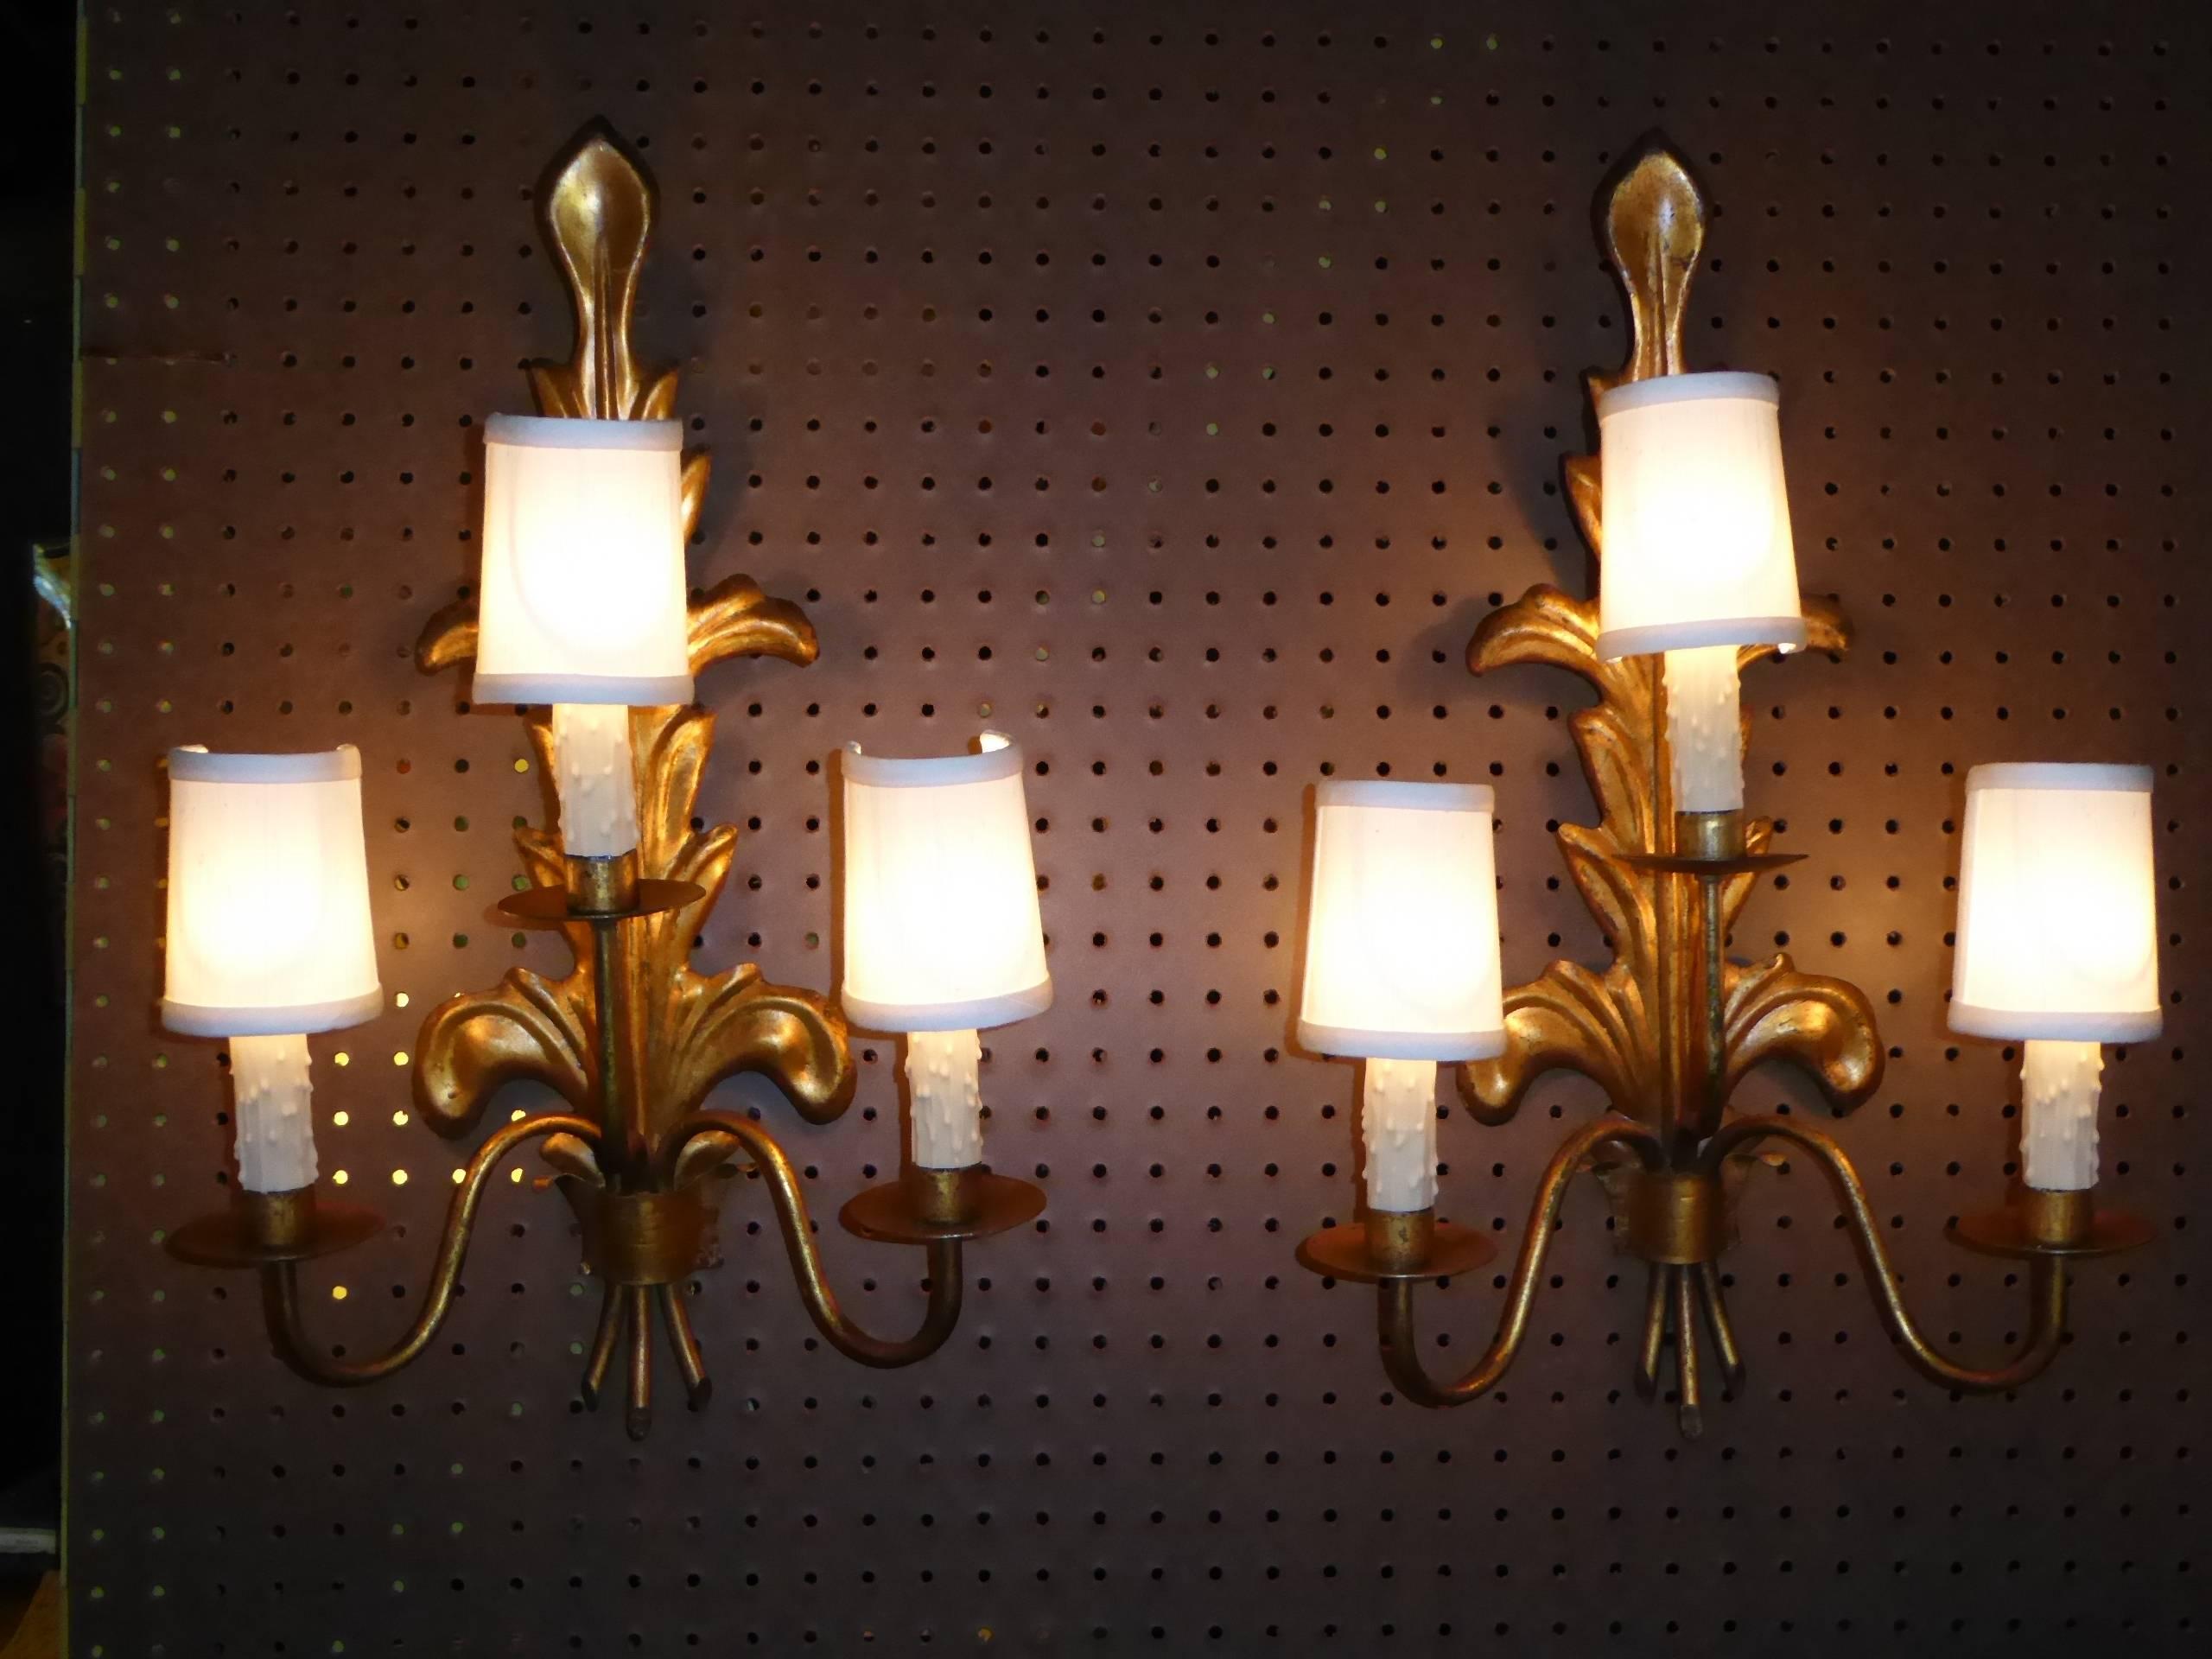 REDUCED FROM $1,200....Fine Mid-Century appliques from Barcelona. Acanthus leaf in gilt tole backs with three curling branches ending in bobeches and wax drip candles. Rewired and with new UL candelabra sockets. 40 watts max each. Crossbar in back